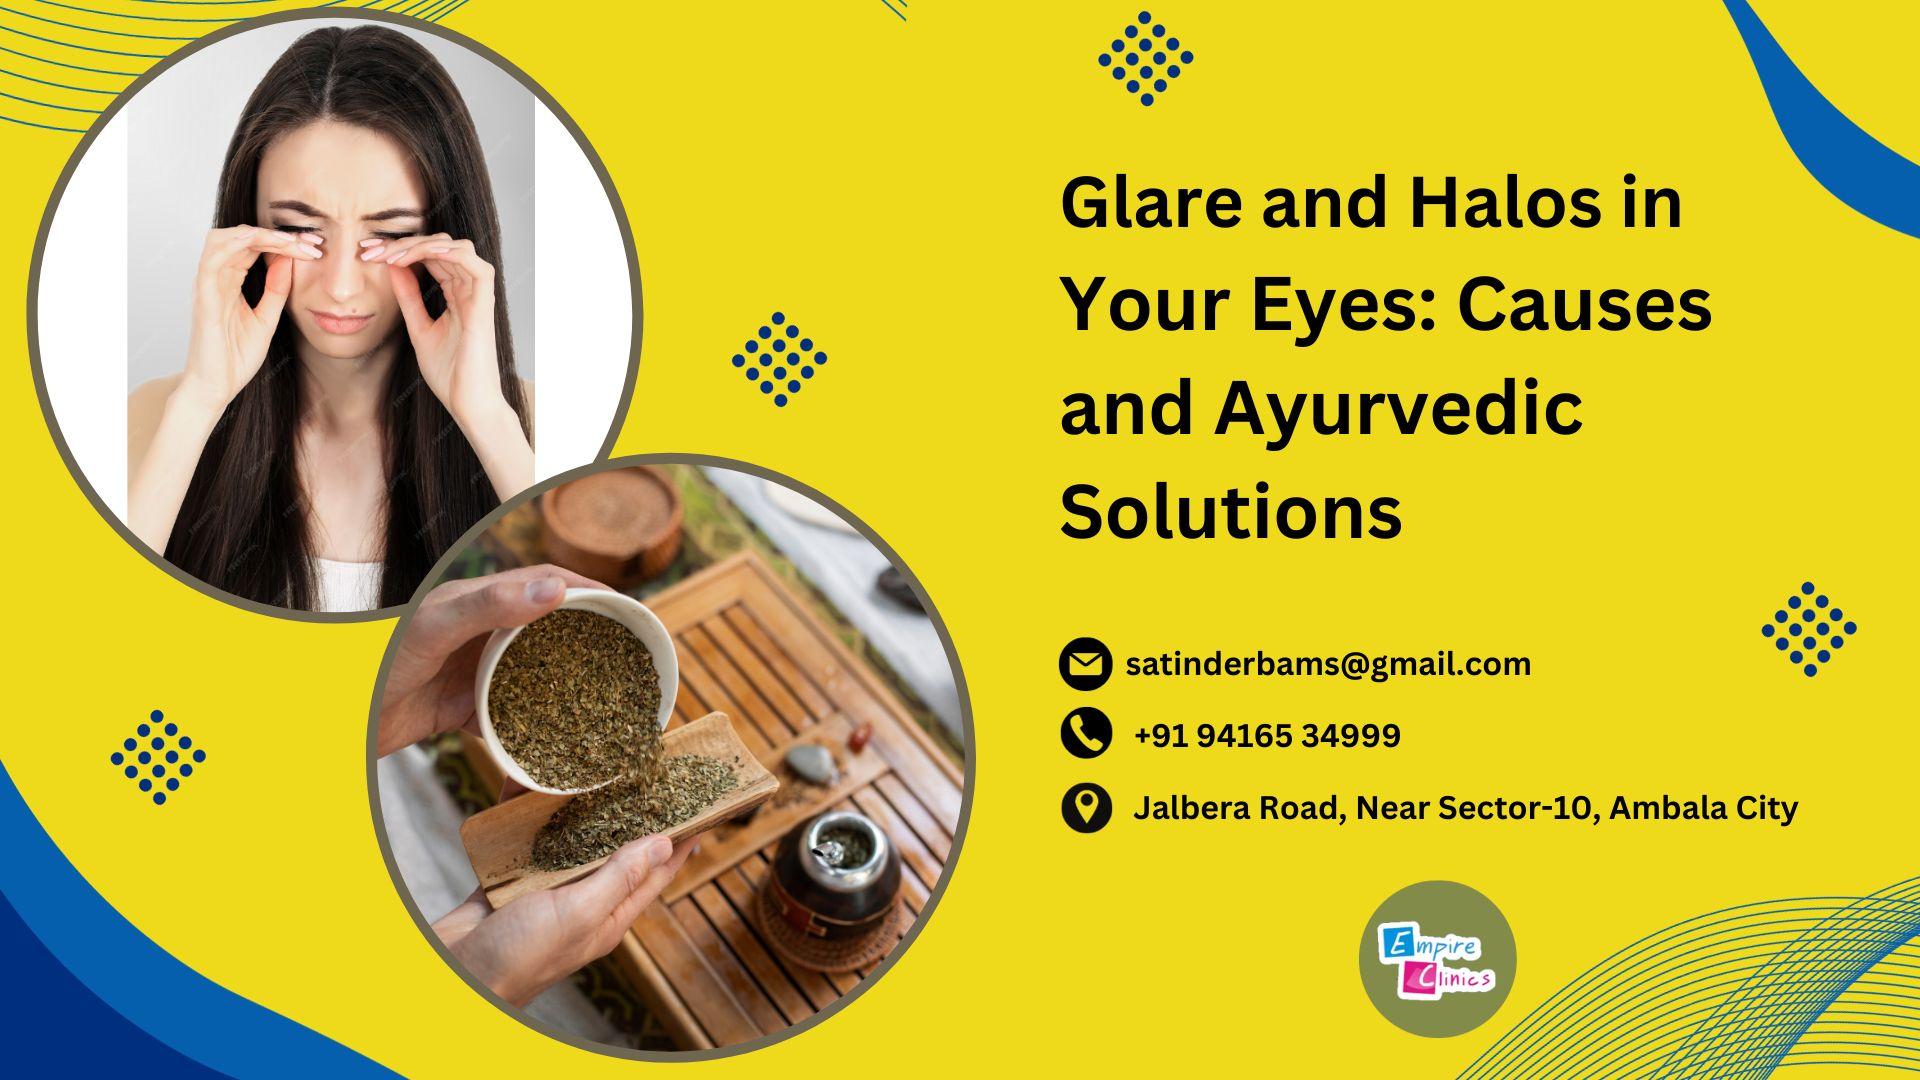 glare-and-halos-in-your-eyes-causes-and-ayurvedic-solutions